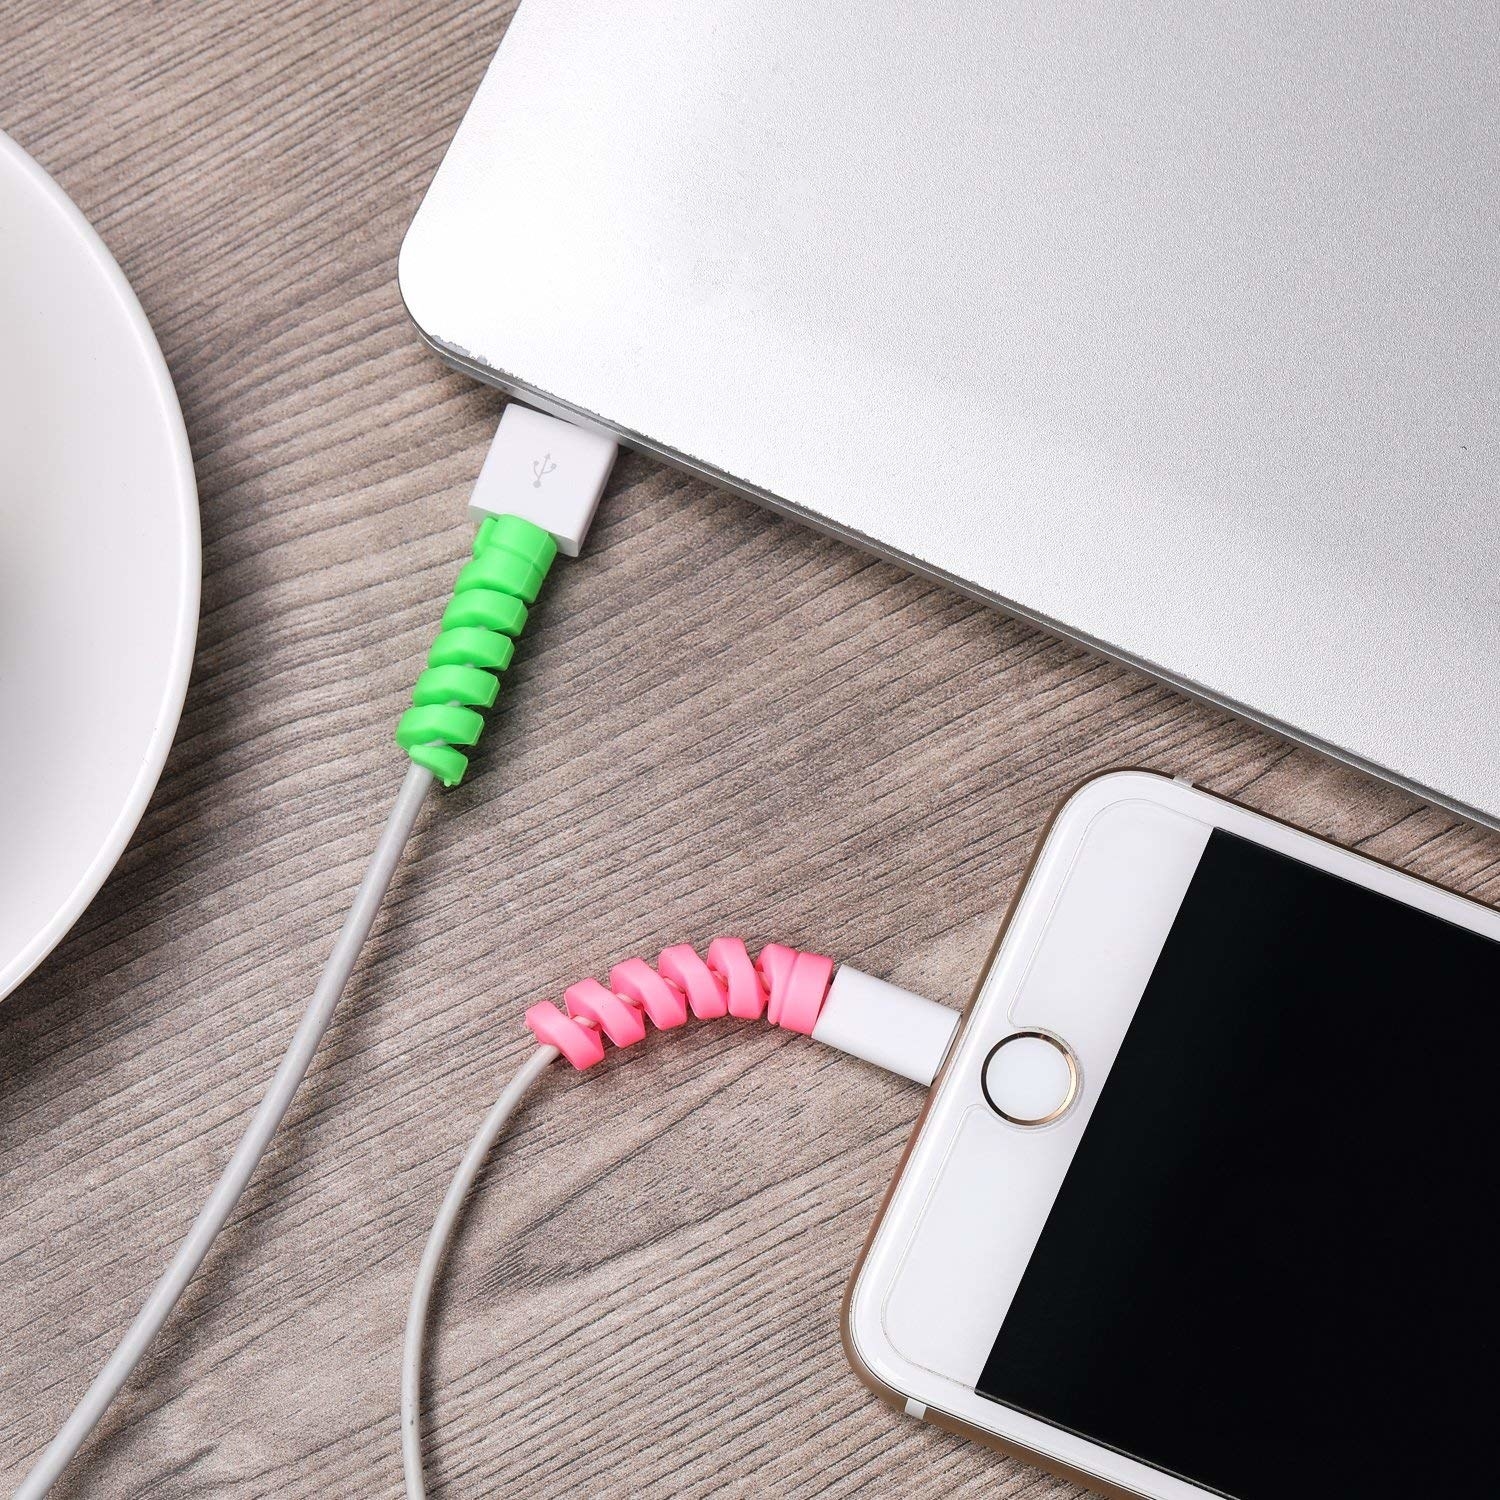 A pink and green cable protector on an iPad and an iPhone cord